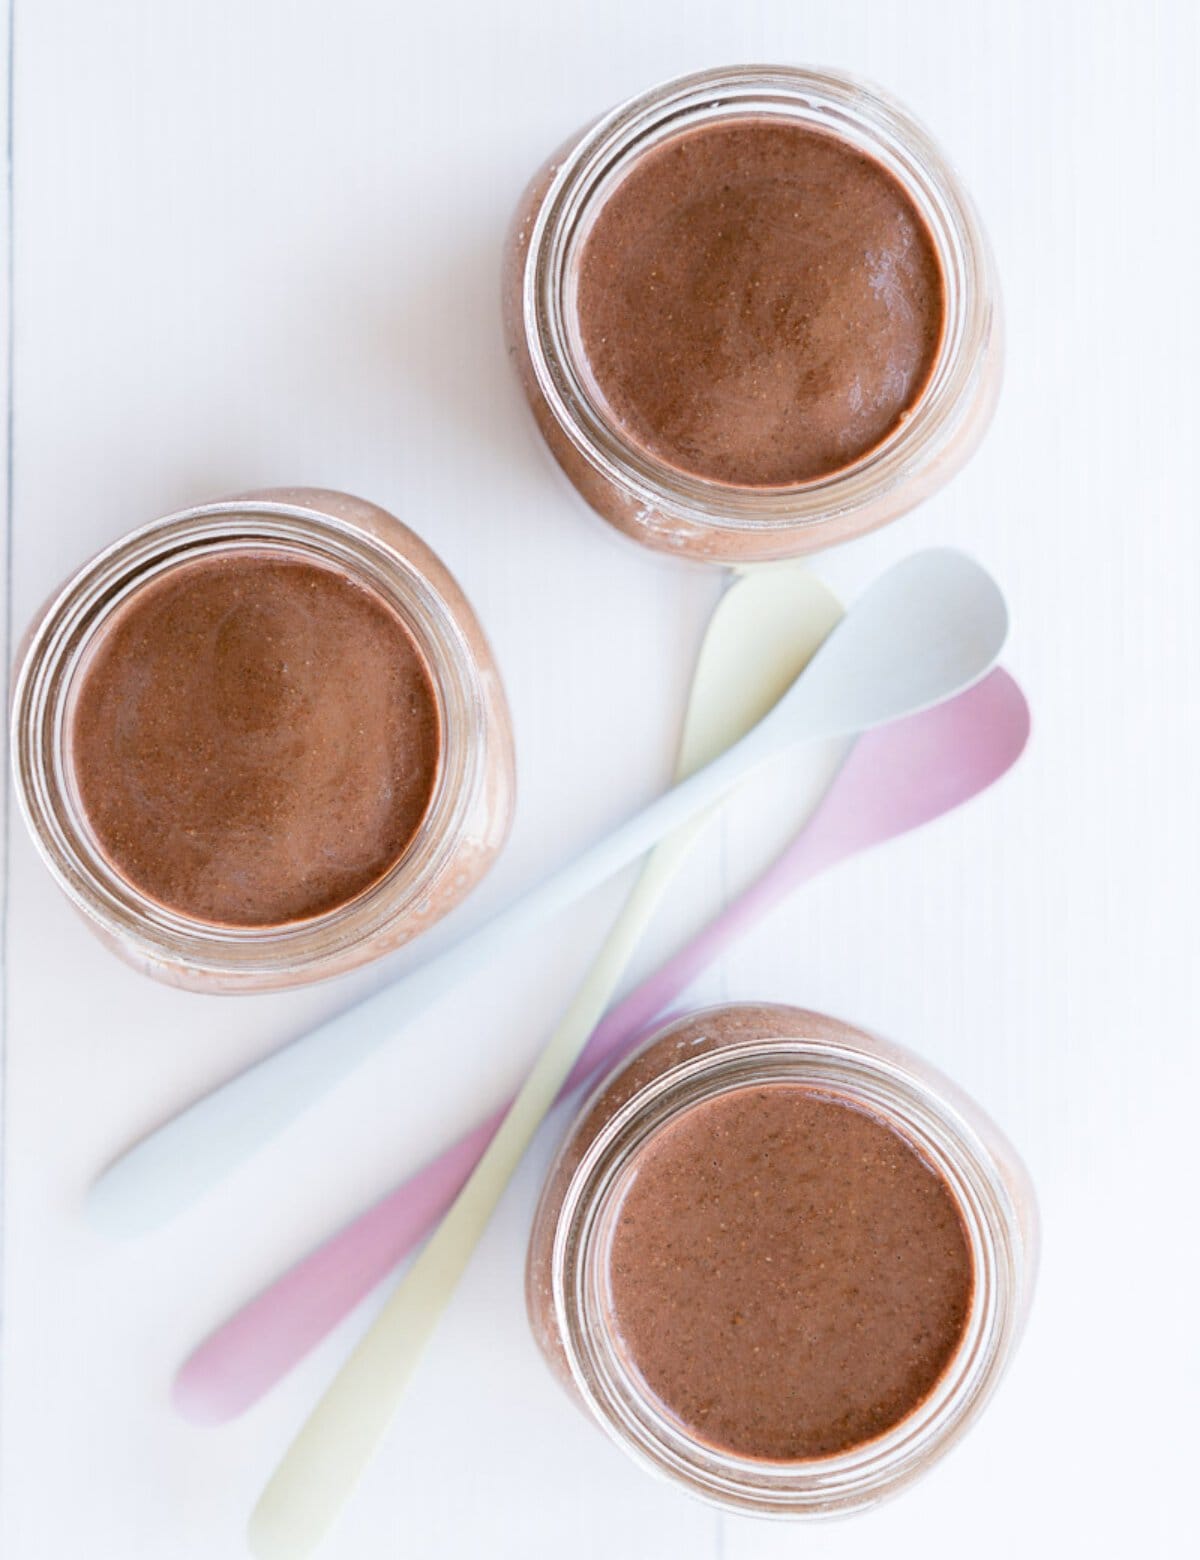 Looking down into three glass jars filled with smooth chocolate pudding next to three long handled dessert spoons. 